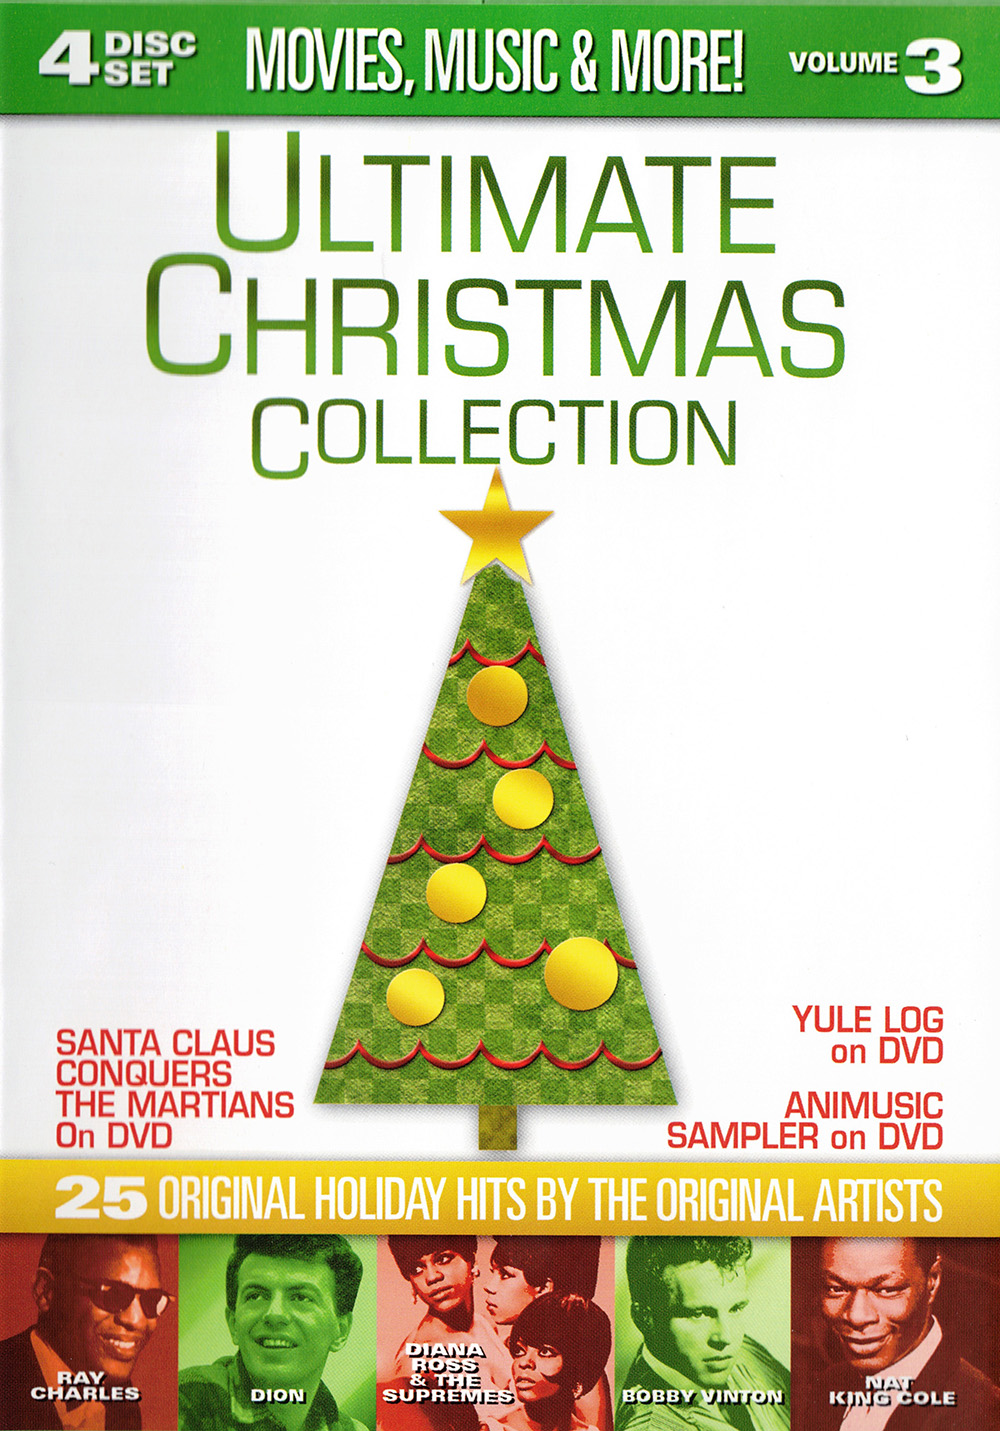 Ultimate Christmas Collection, Vol. 3 (4 CD)